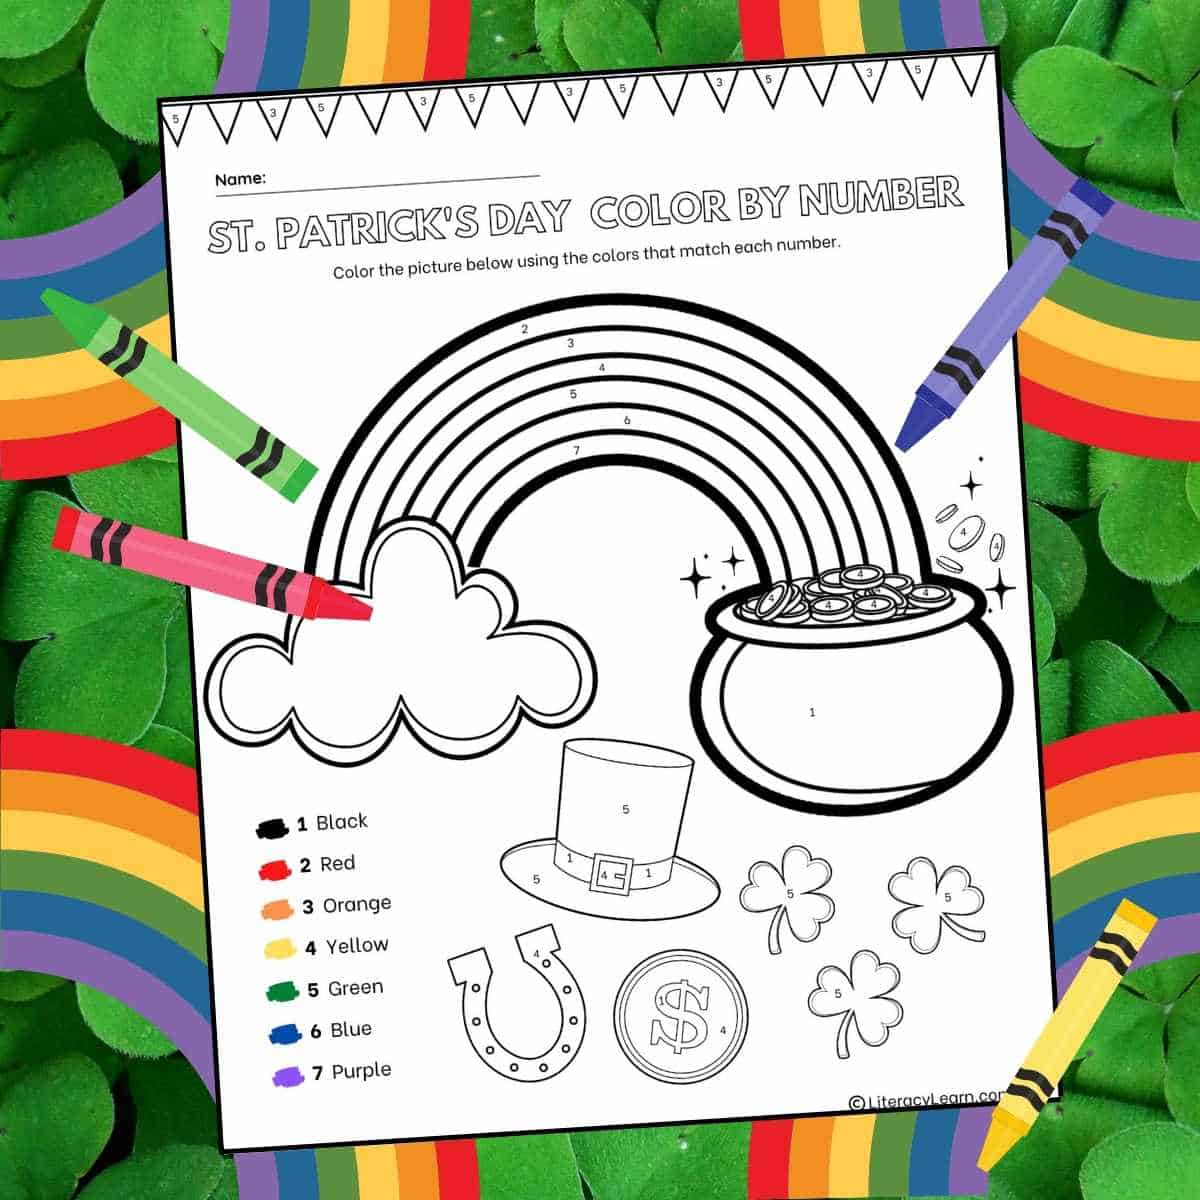 Graphic with the St. Patrick's Day color by number worksheet on a shamrock & rainbow background.